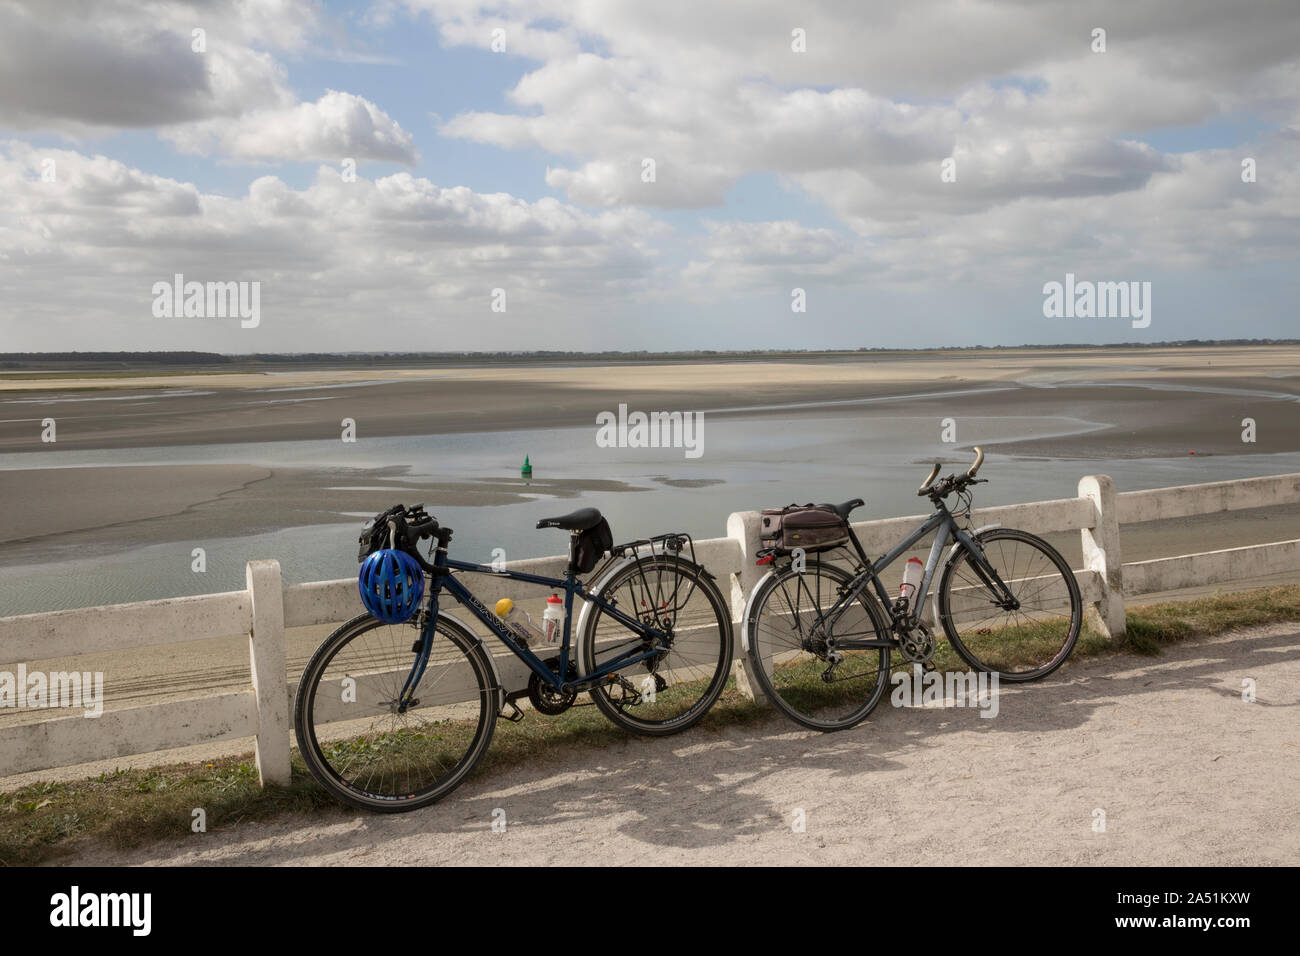 Cycles leaning on fence, Le Crotoy, Picardy. cycle touring Stock Photo